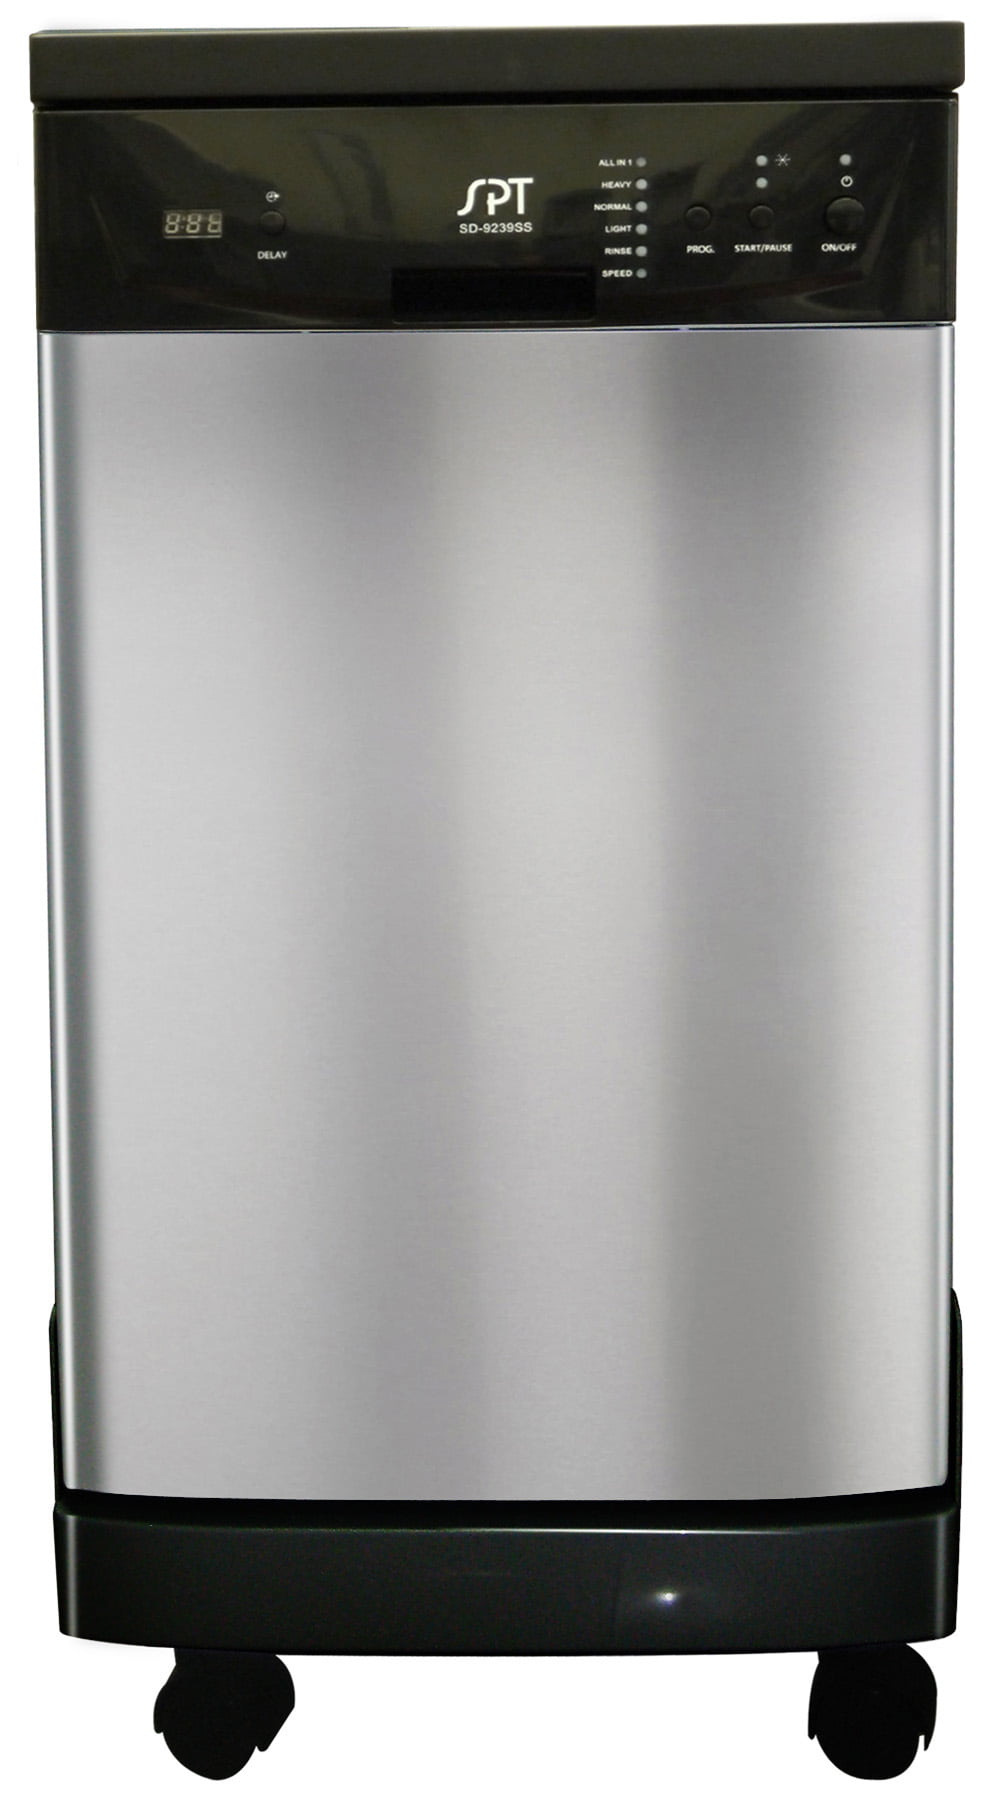 sunpentown-18-portable-energy-star-dishwasher-in-stainless-steel